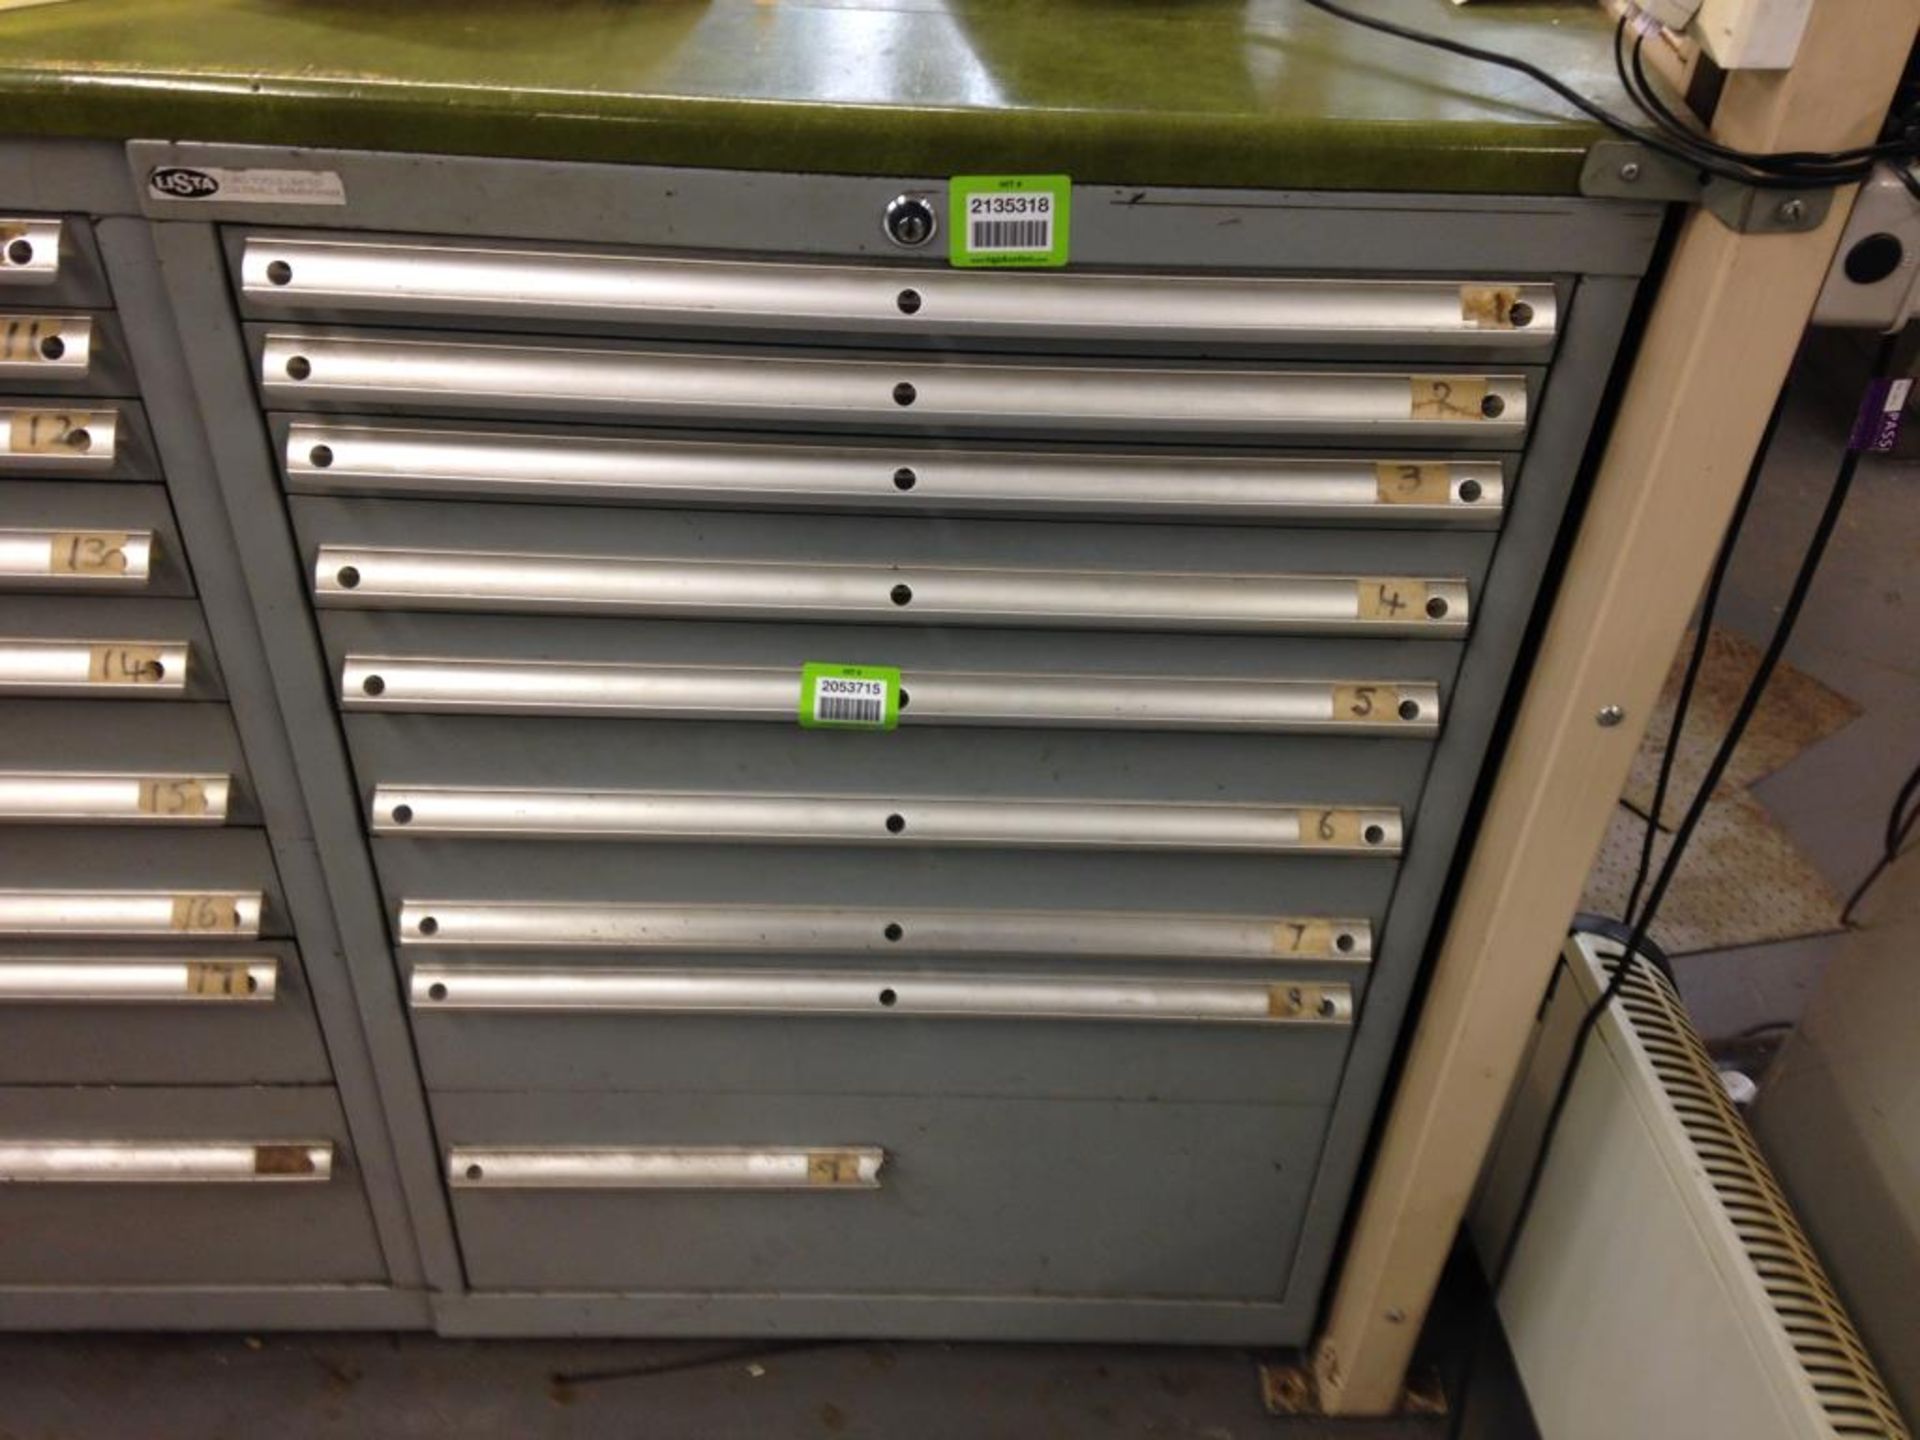 Lista Roller Drawer Tooling Cabinet, 9 Drawers. HIT# 2135318. Incoming Inspect Cage View. Asset